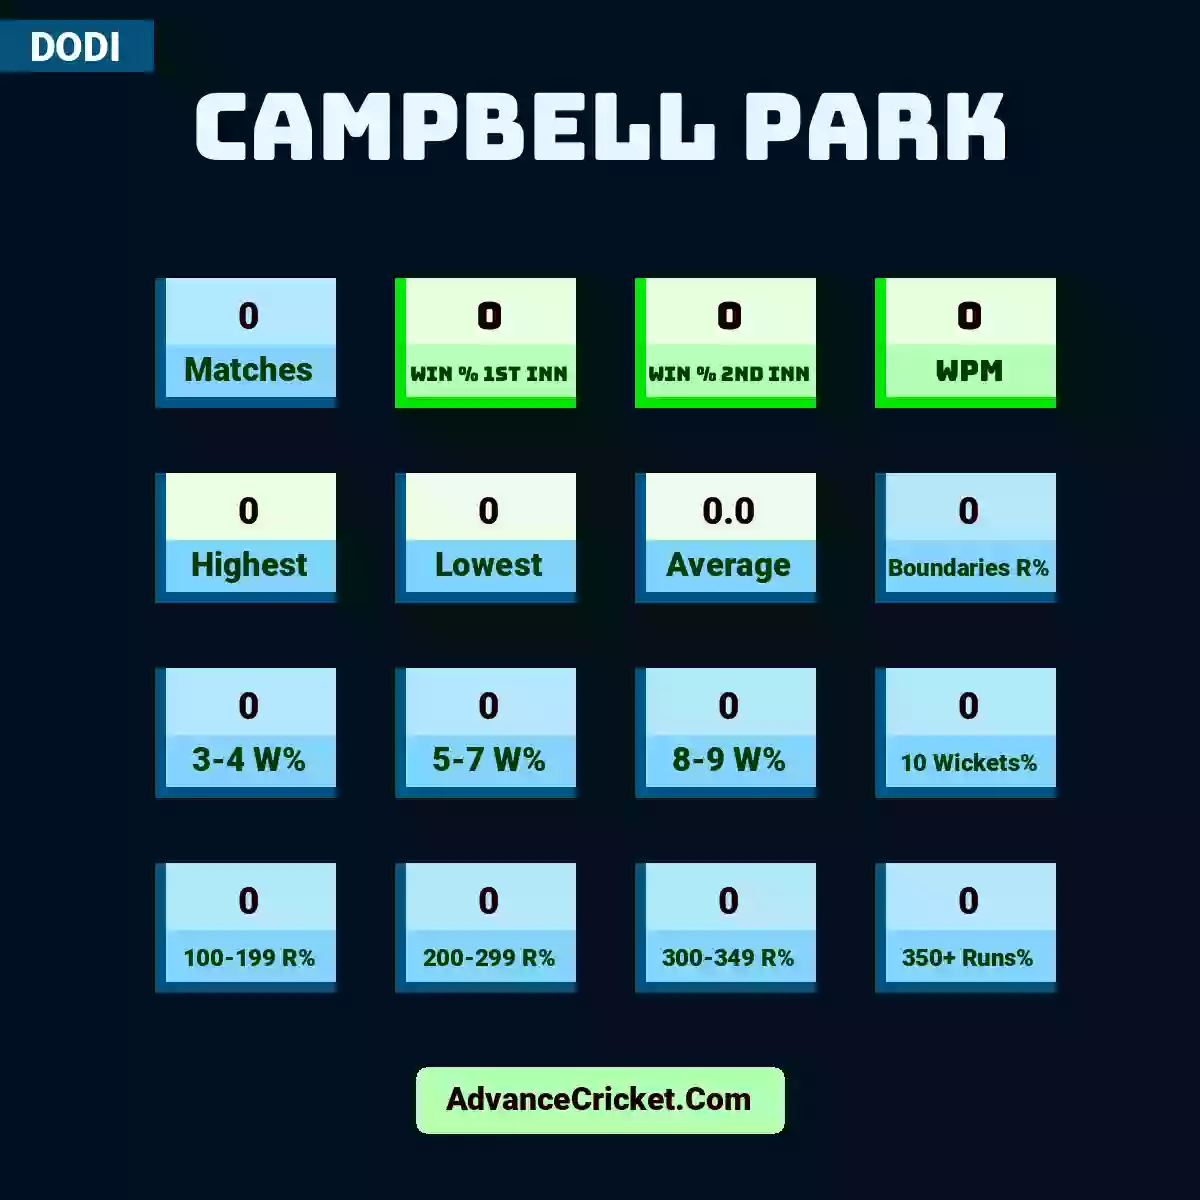 Image showing Campbell Park with Matches: 0, Win % 1st Inn: 0, Win % 2nd Inn: 0, WPM: 0, Highest: 0, Lowest: 0, Average: 0.0, Boundaries R%: 0, 3-4 W%: 0, 5-7 W%: 0, 8-9 W%: 0, 10 Wickets%: 0, 100-199 R%: 0, 200-299 R%: 0, 300-349 R%: 0, 350+ Runs%: 0.